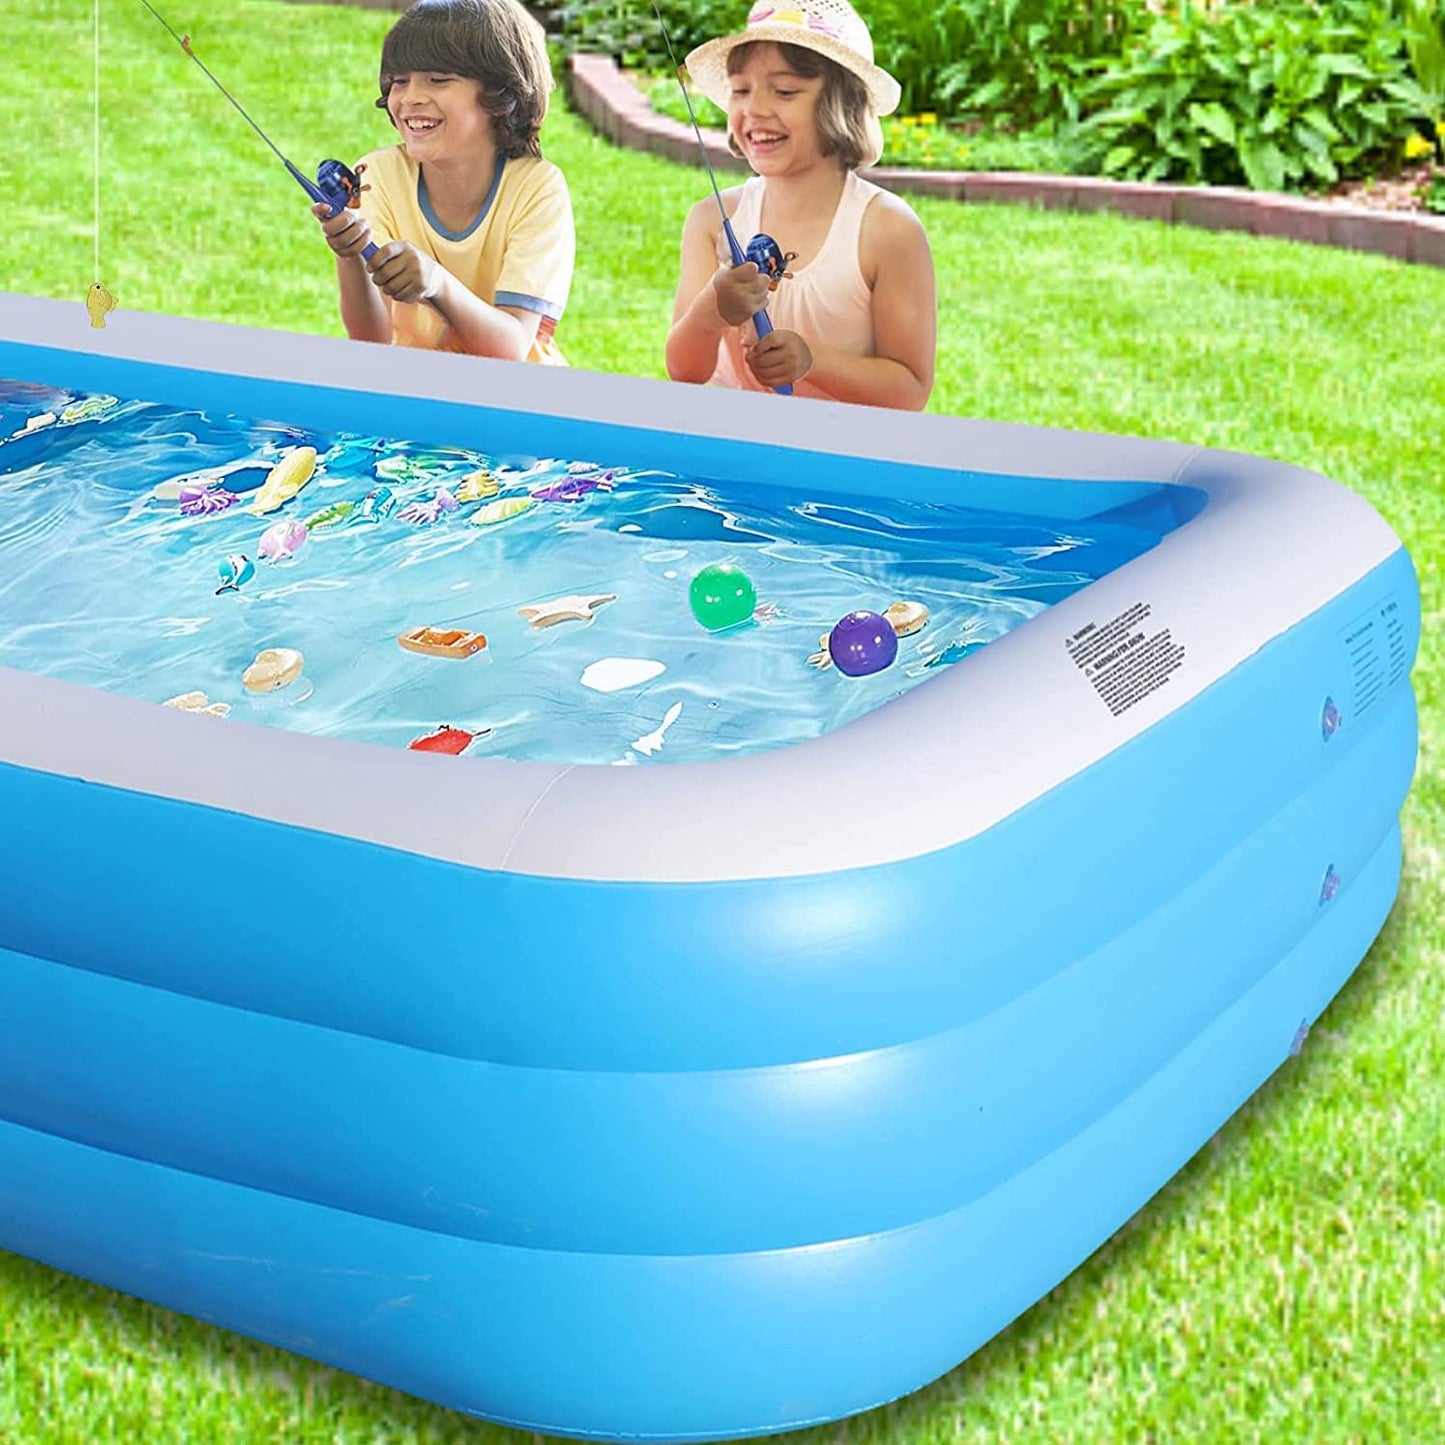 MorTime Inflatable Swimming Pool, 120 x 72 x 22 Giant Kiddie Pool for Kids and Adults Outdoor Yard Summer Party (Swimming Pool)